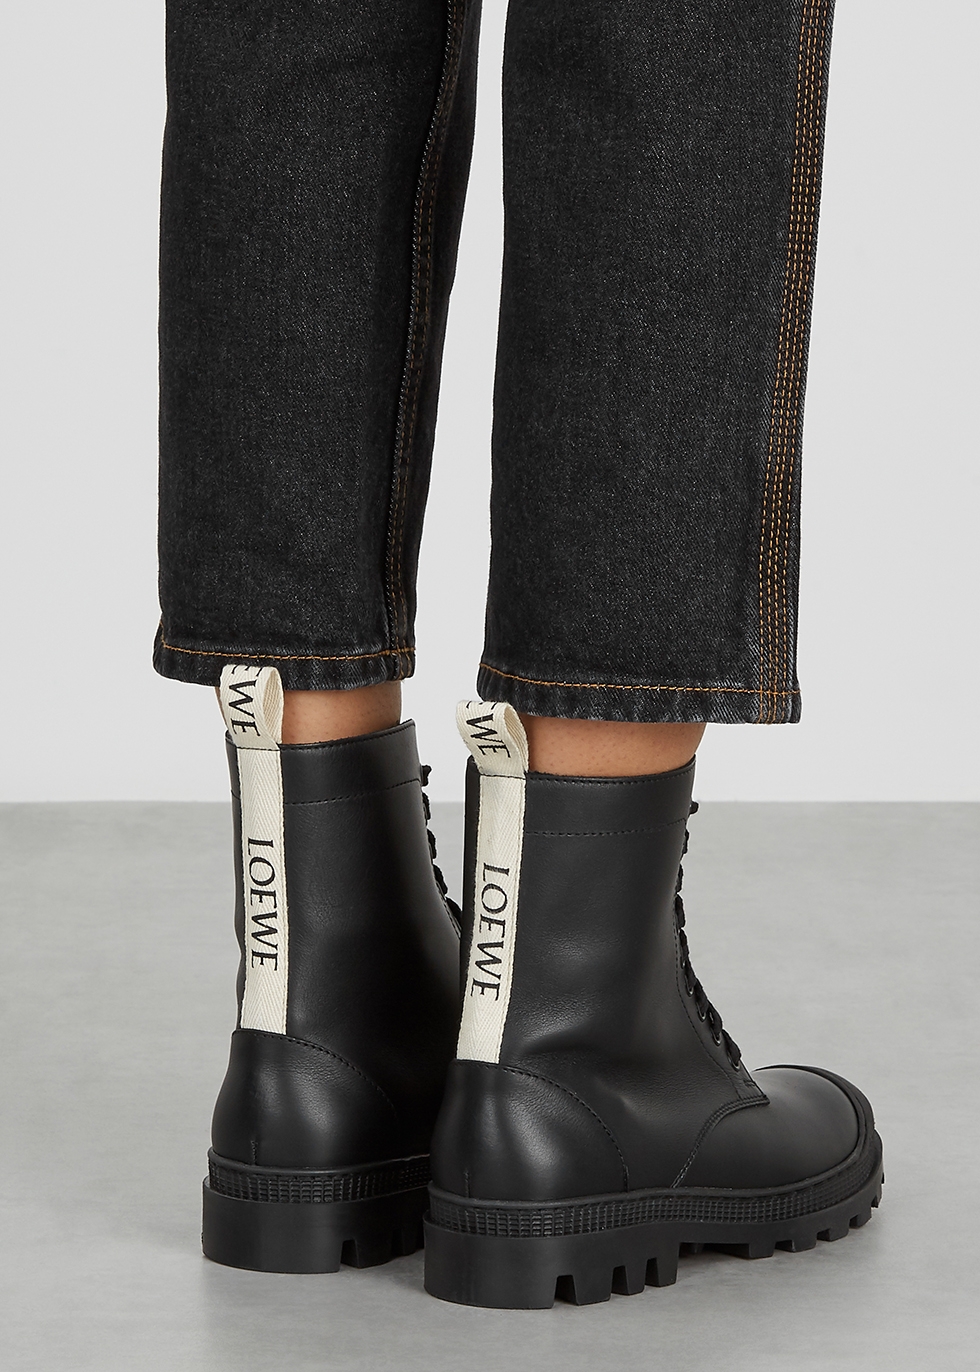 Loewe Black leather ankle boots 